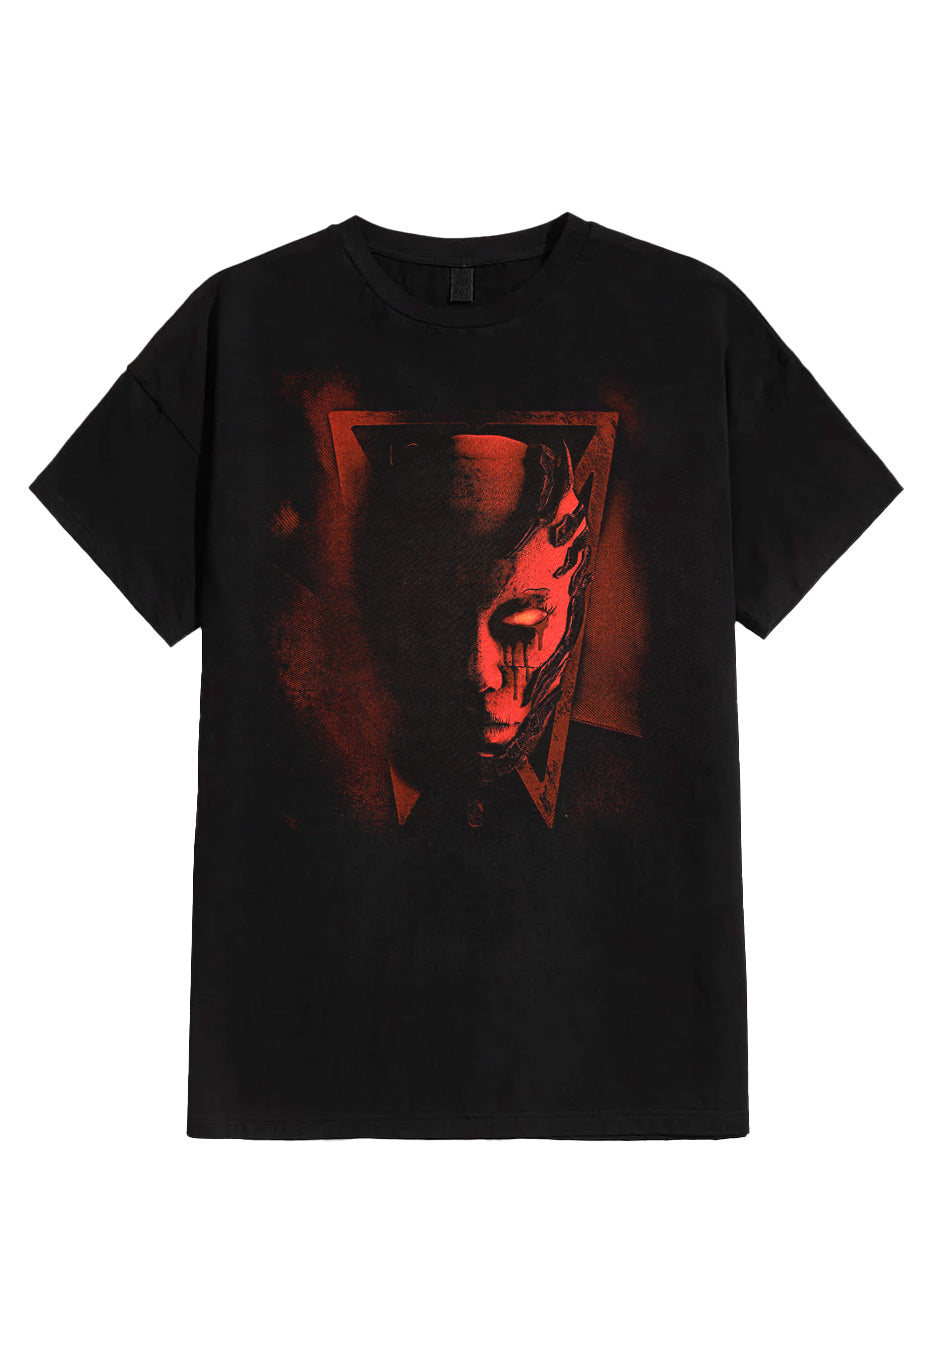 Within Temptation - Crowning Purge - T-Shirt